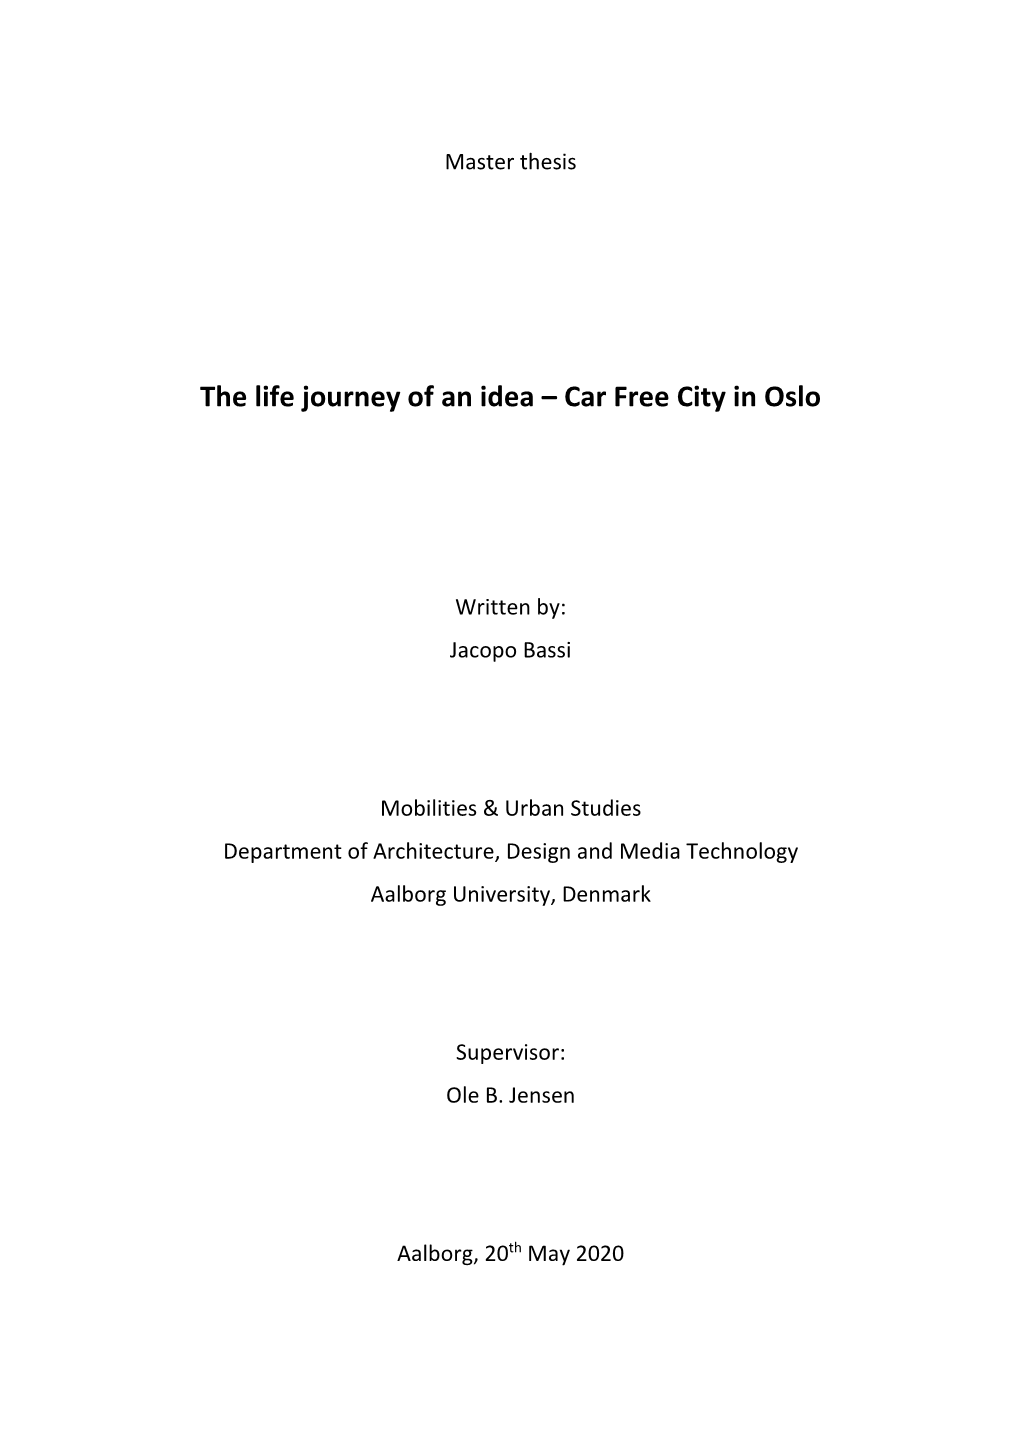 The Life Journey of an Idea – Car Free City in Oslo